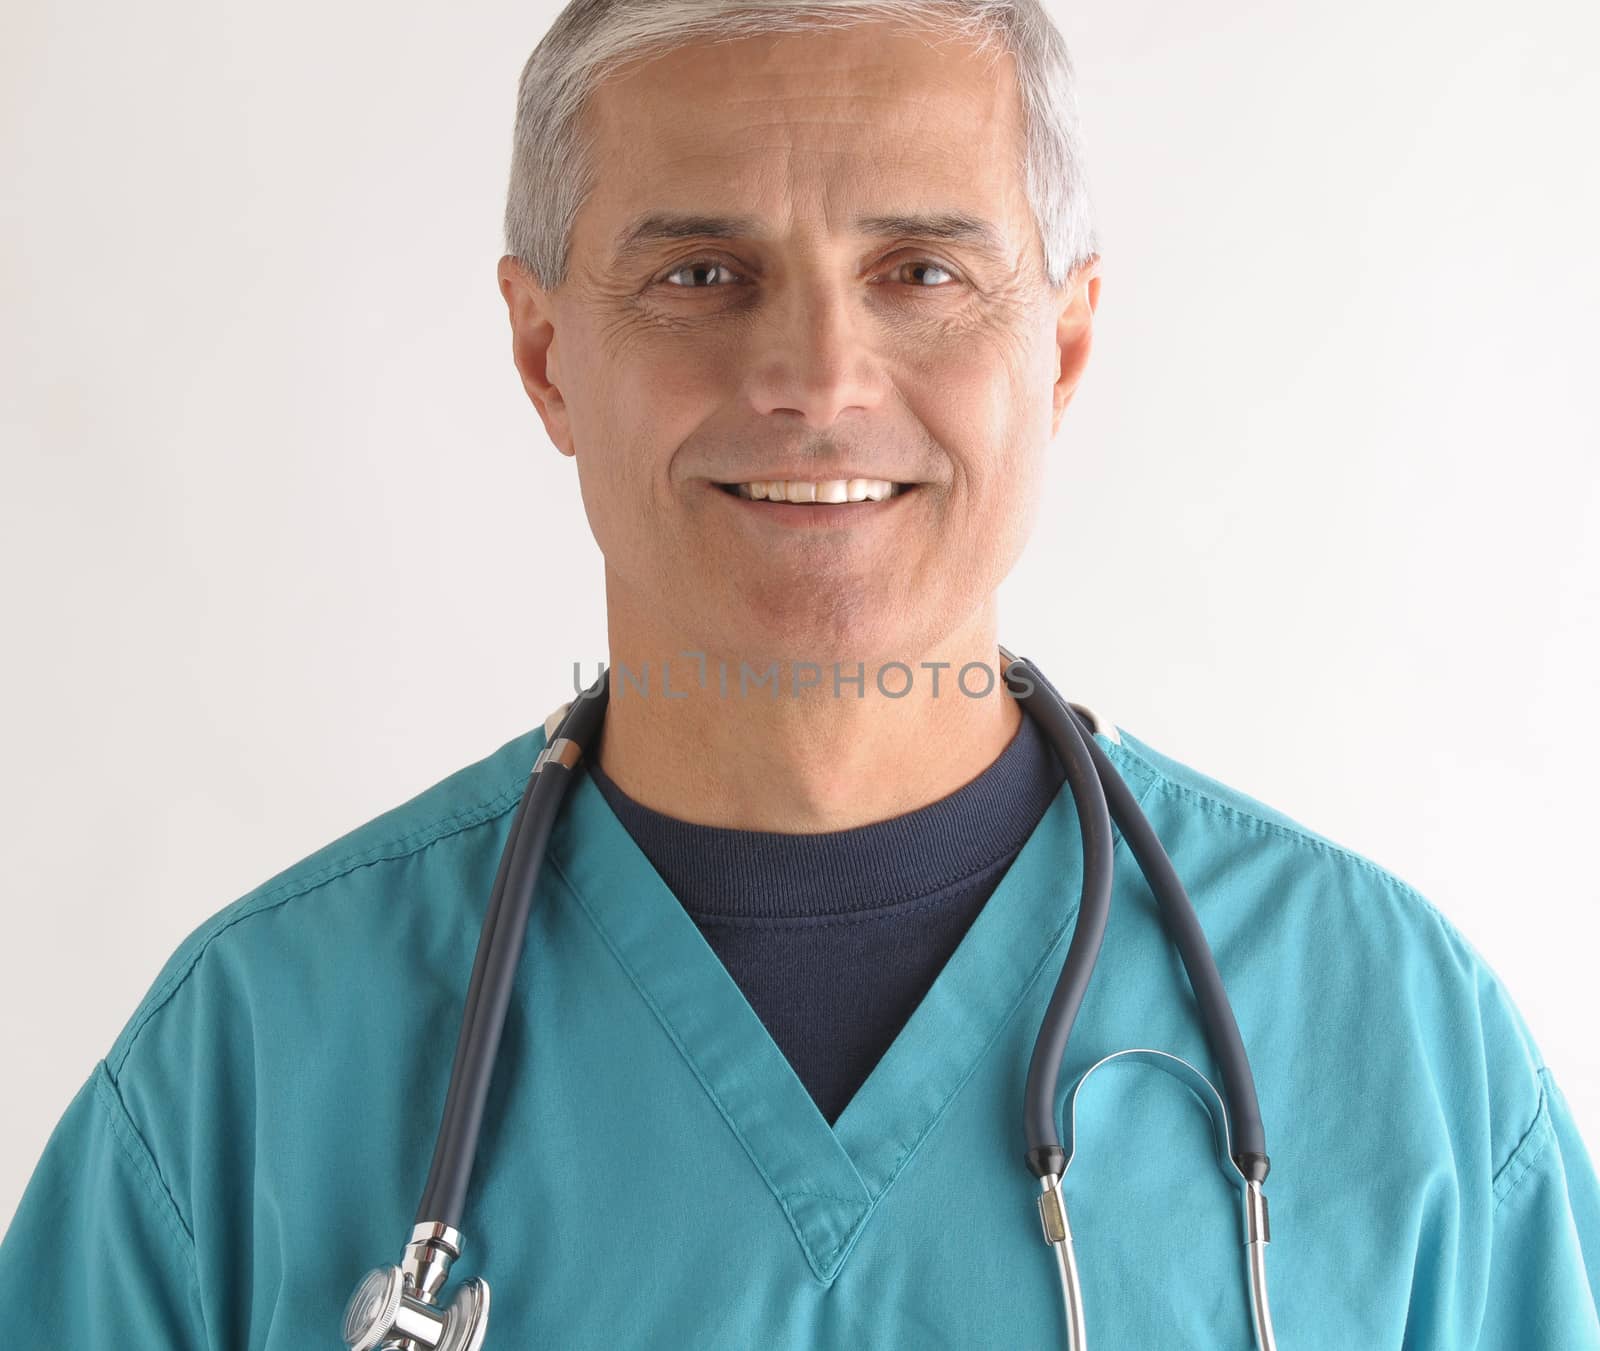 Doctor in Scrubs and Stethoscope cloesup by sCukrov